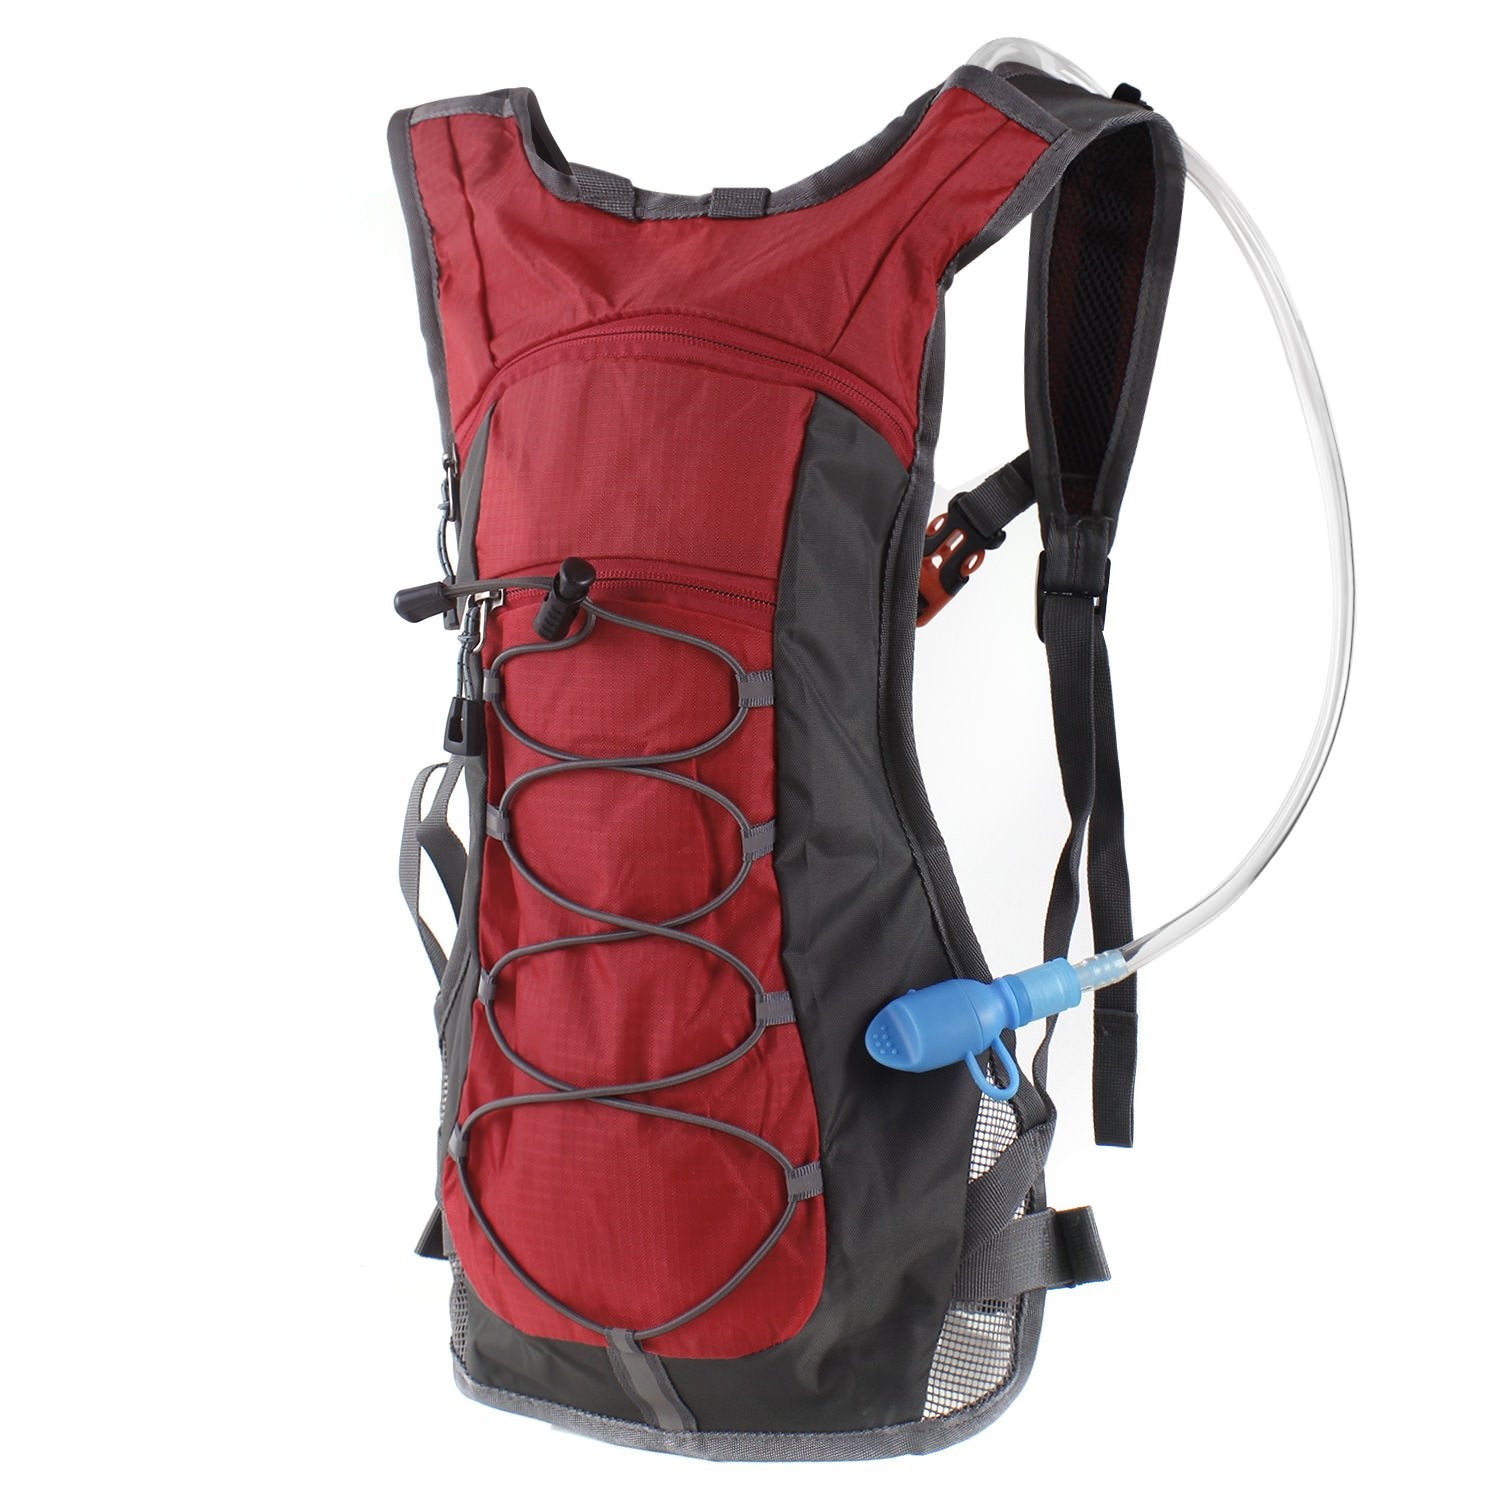 2L Water Bladder Hydration Pack with 70 oz